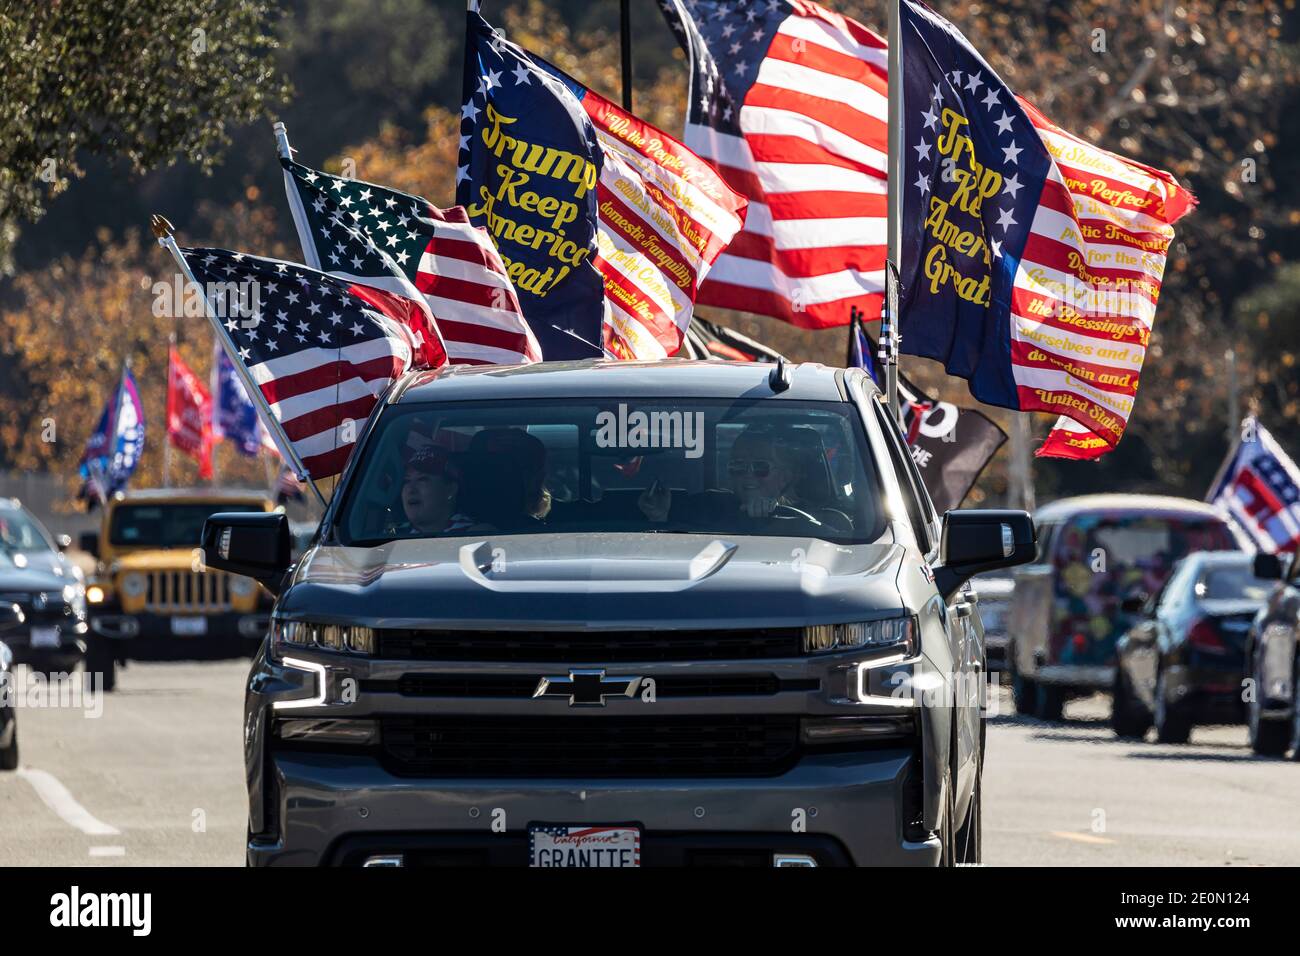 Pasadena, USA. 01st Jan, 2021. Trump supporters hold an impromptu car parade in Pasadena. The annual Tournament of Roses parade was cancelled this year due to Covid-19 concerns. Trump supporters formed a 100 car long caravan and paraded on Colorado Blvd. in cars and trucks decorated with Trump flags. 1/1/2021 Pasadena, CA USA (Photo by Ted Soqui/SIPA USA) Credit: Sipa USA/Alamy Live News Stock Photo